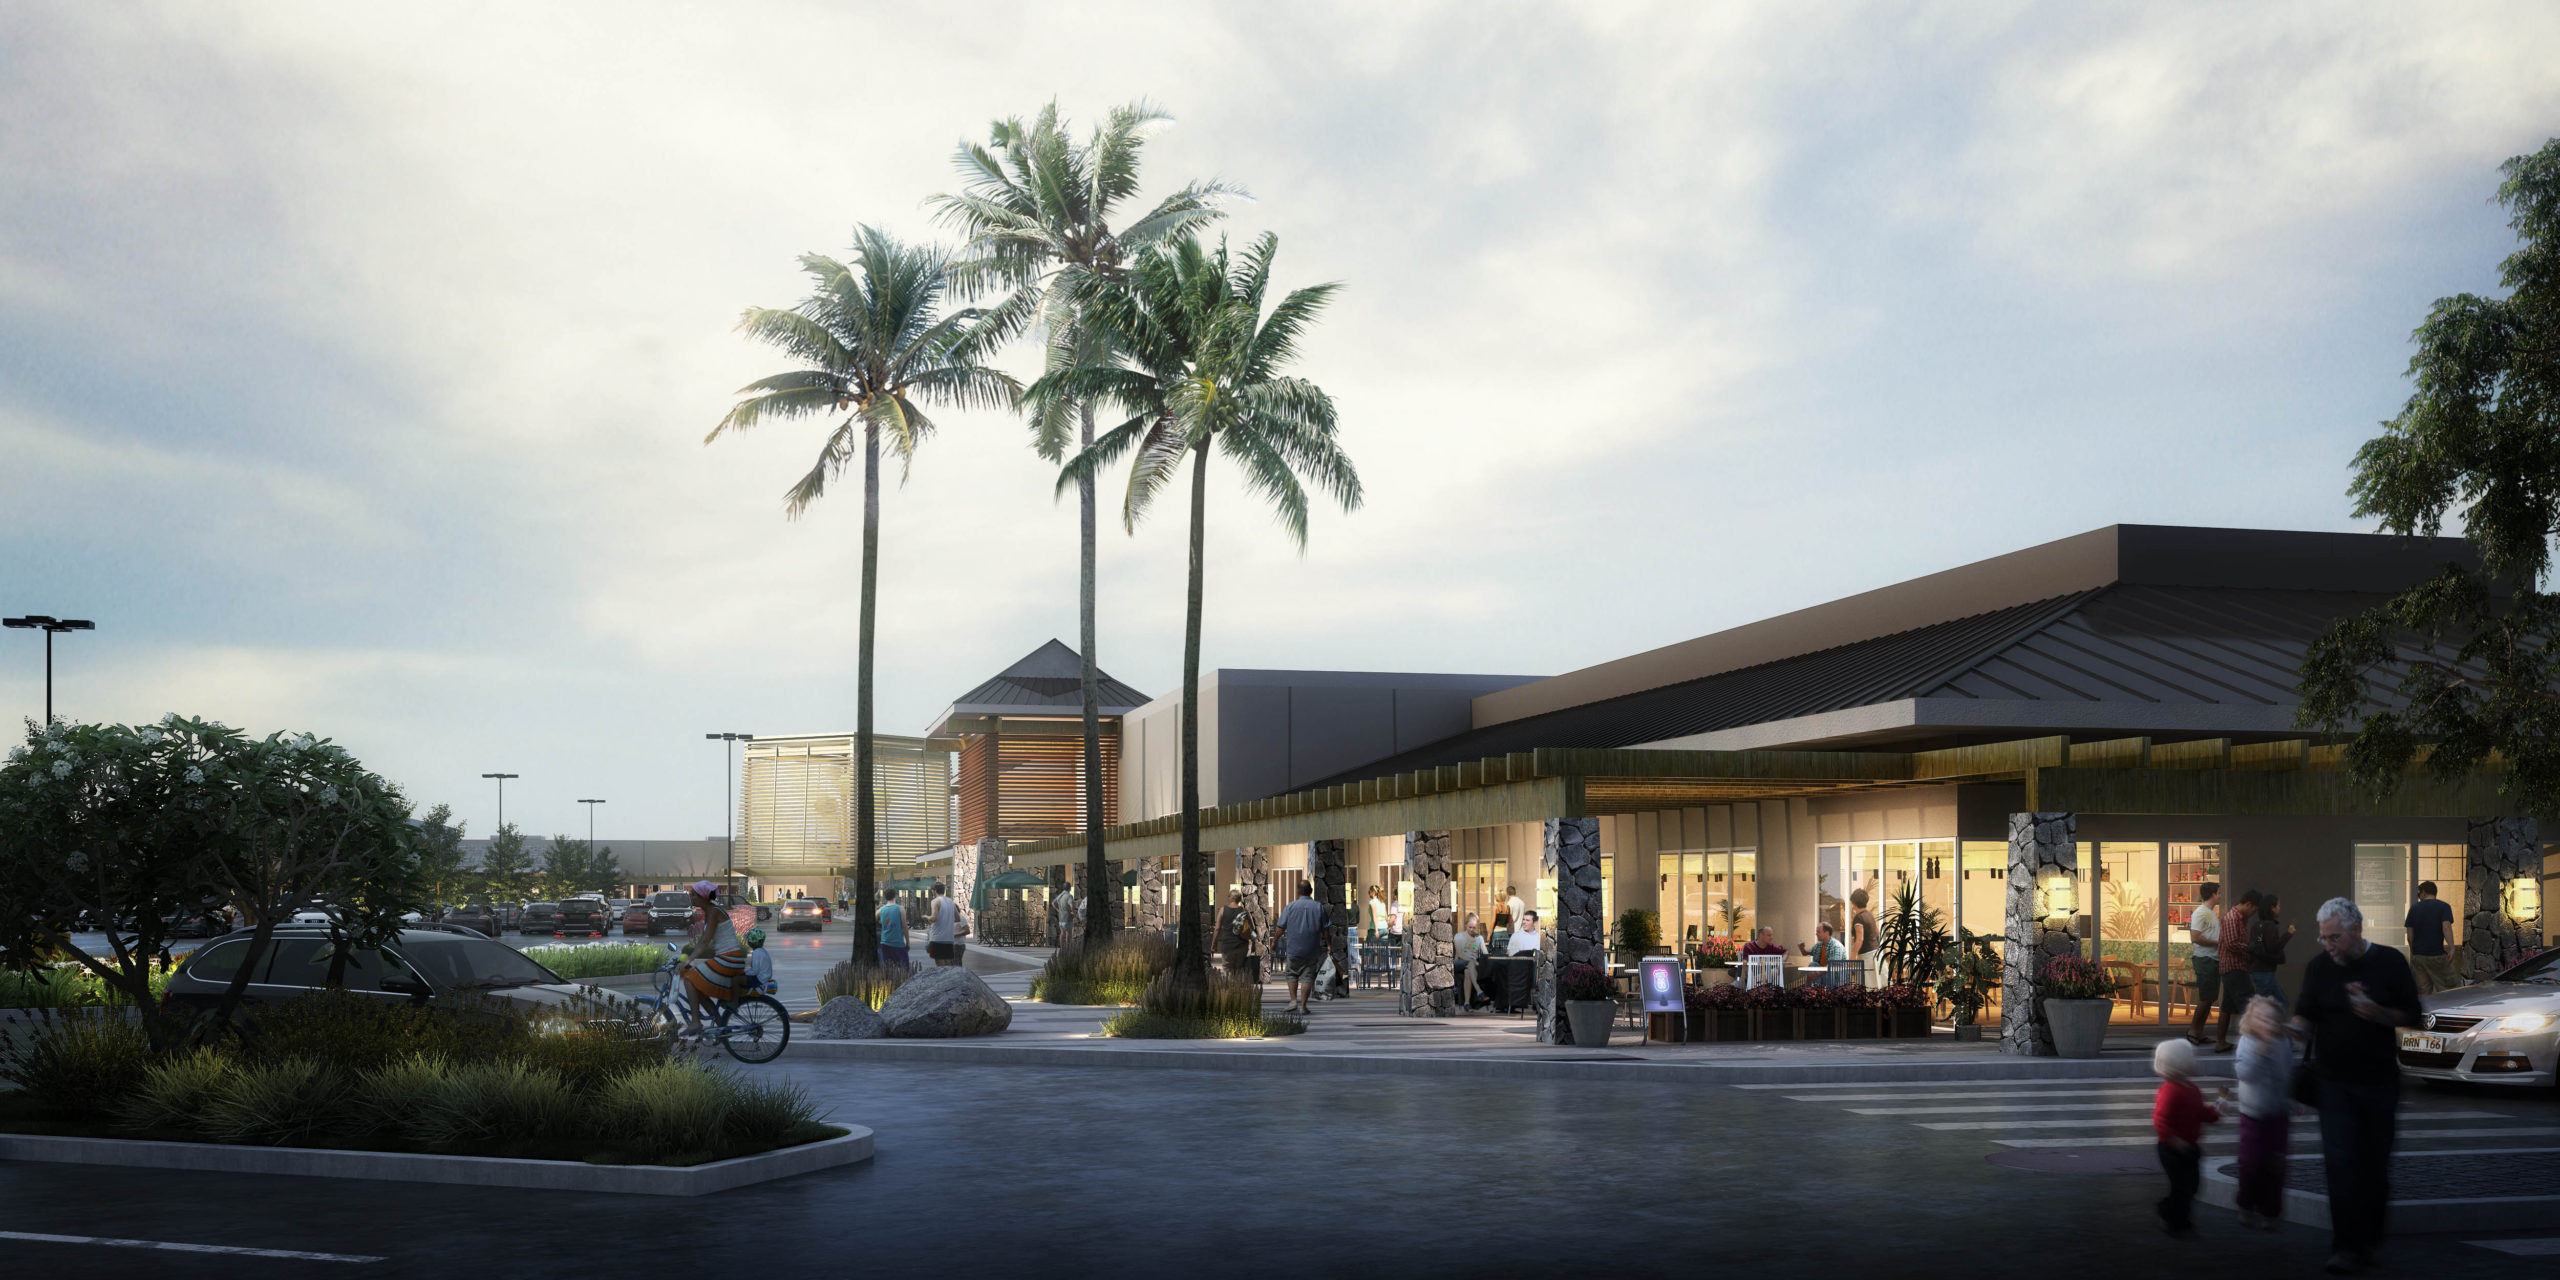 george-smith-partners-secures-51-7-million-senior-construction-financing-16-2-mezzanine-debt-for-shopping-center-in-kona-hawaii